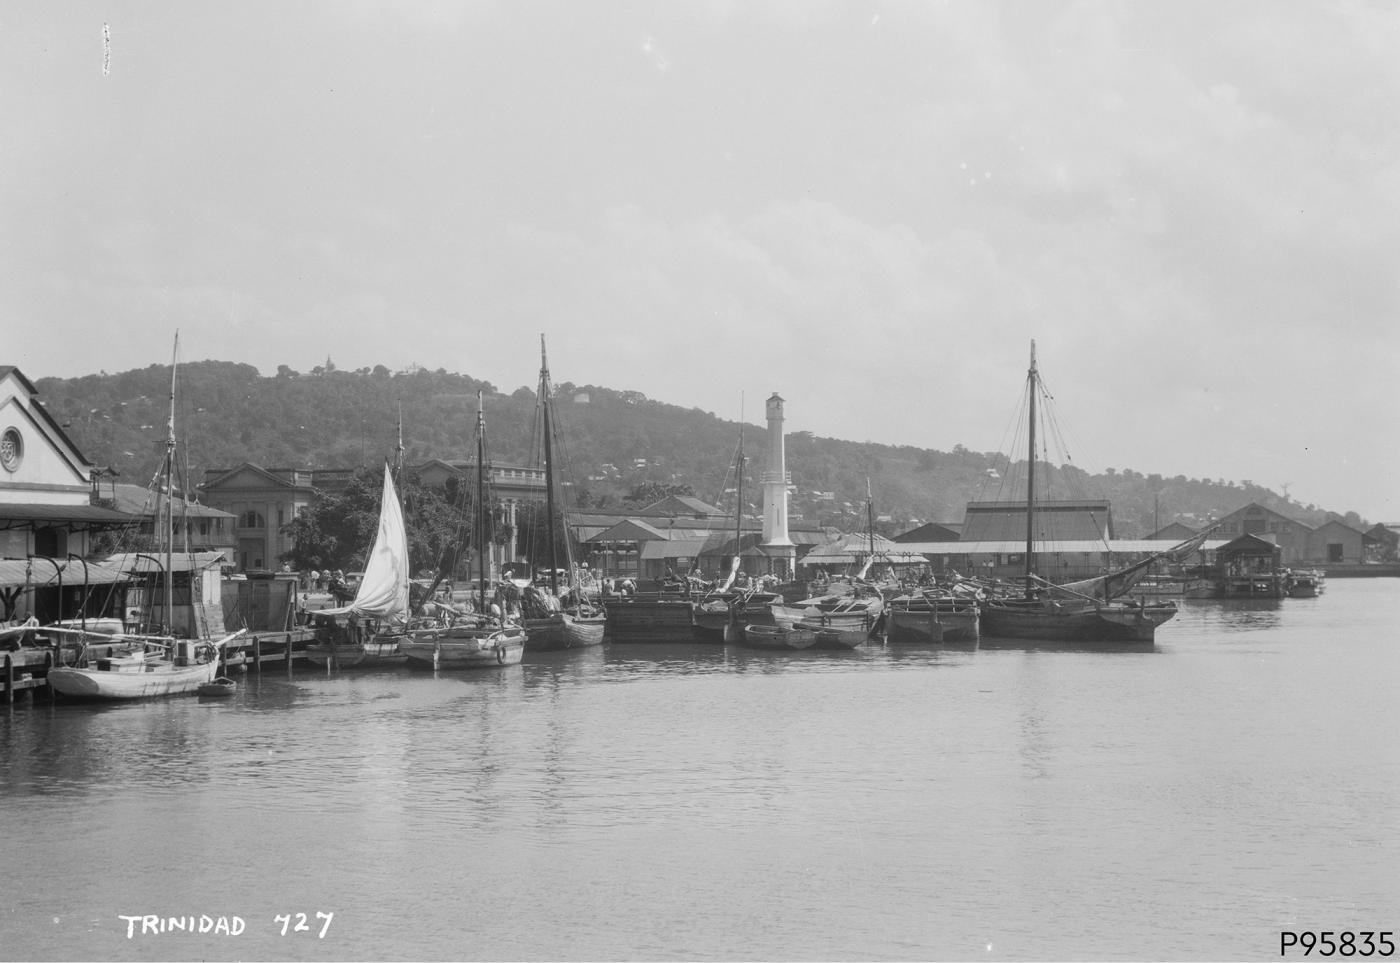 An image showing 'Port of Spain, Trinidad'